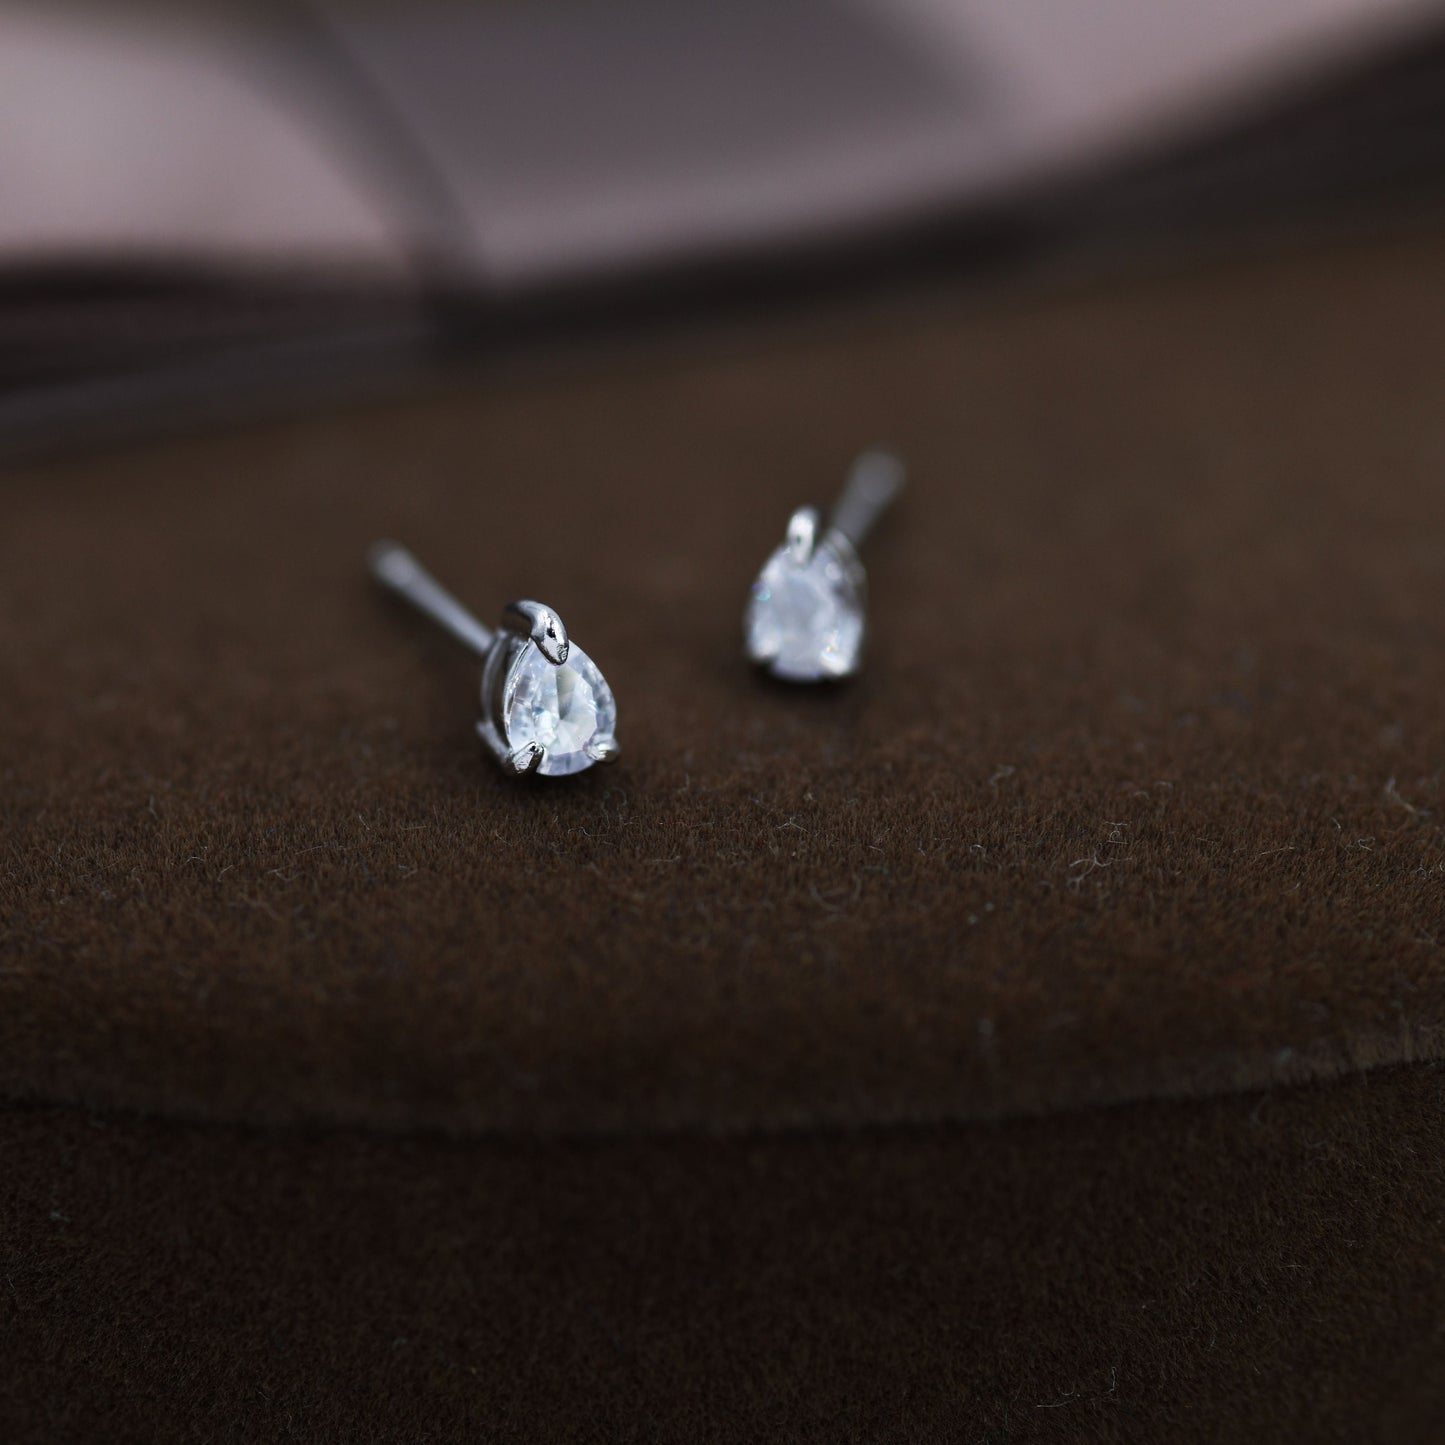 Extra Tiny Droplet CZ Stud Earrings in Sterling Silver, Tiny Pear Cut CZ Stud Earrings, Silver or Gold